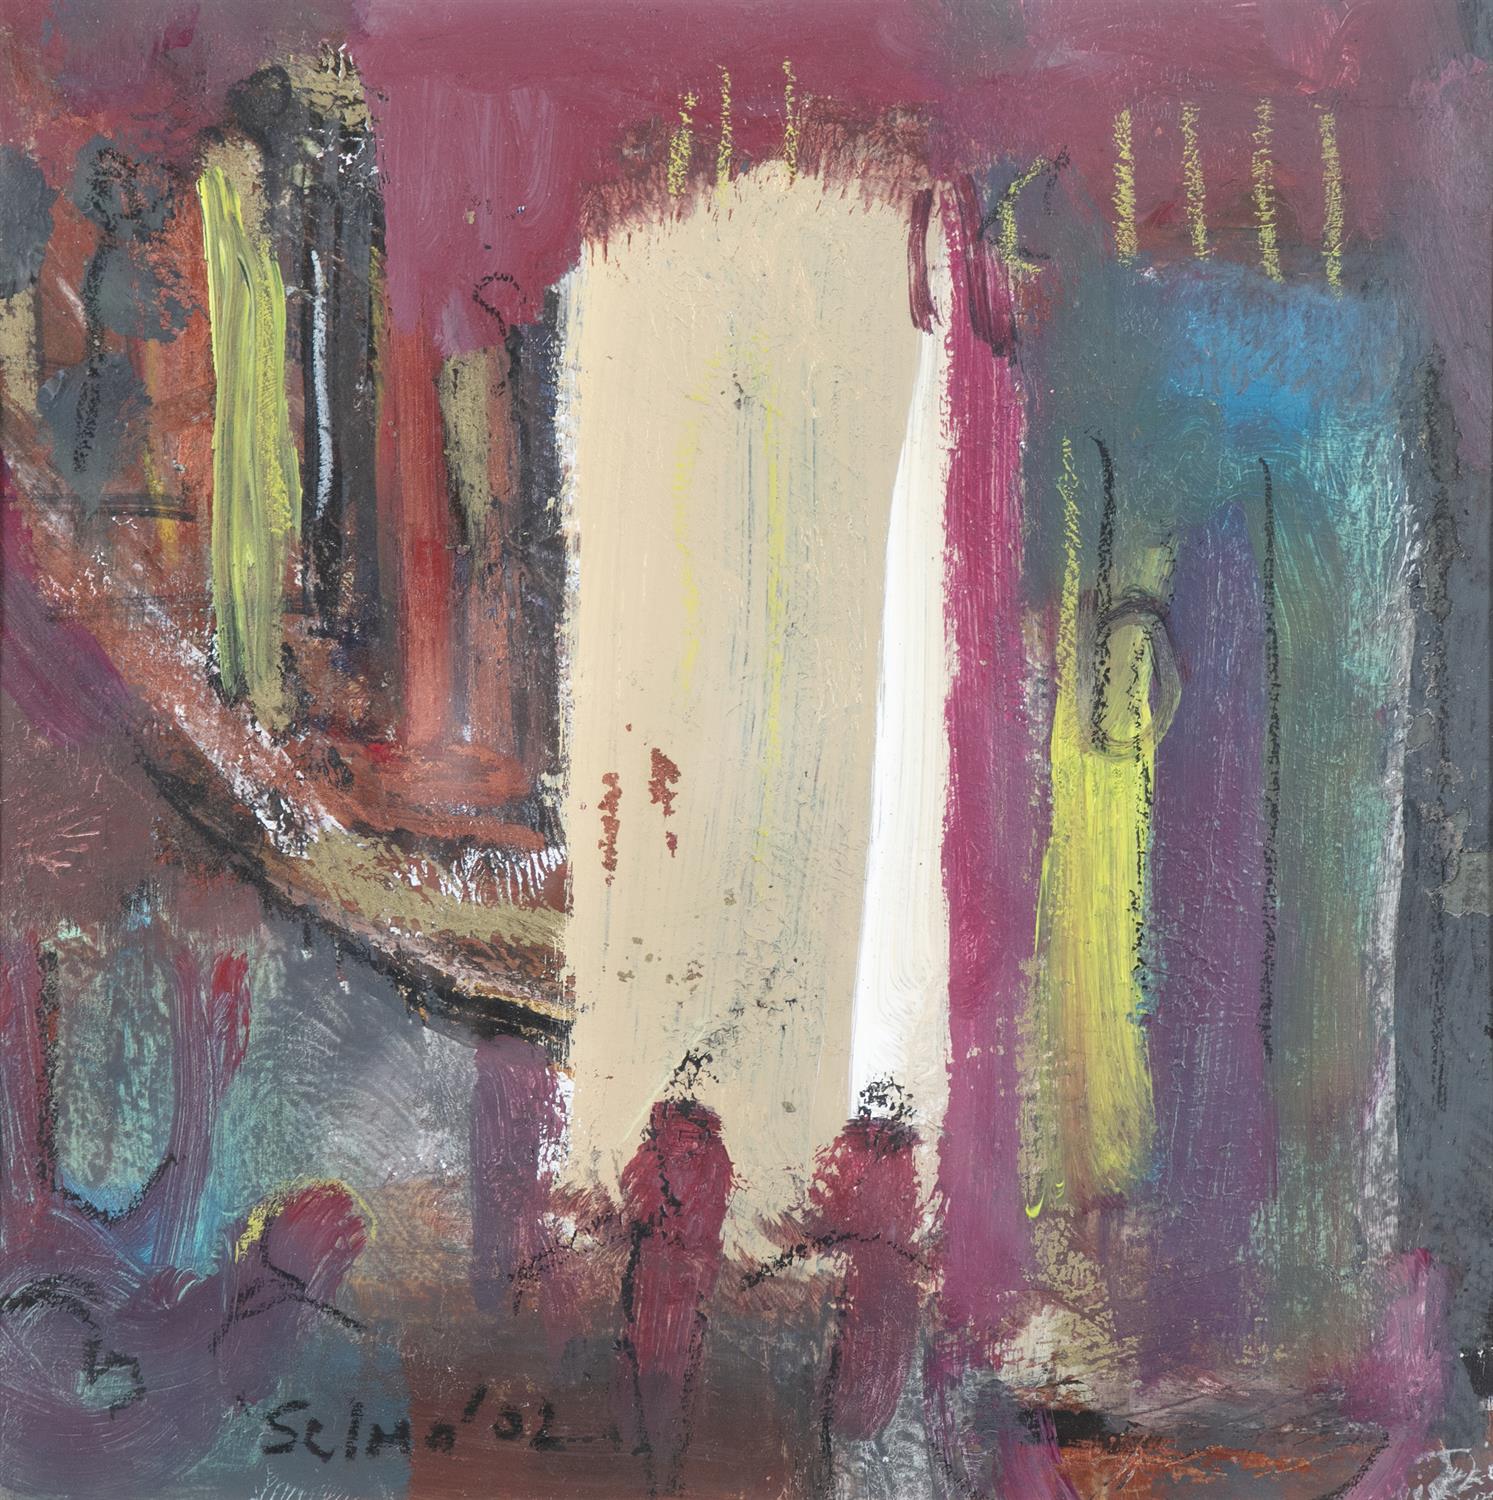 SELMA MCCORMACK (20th/21st Century) Opera Acrylic on paper, 30 x 30cm Signed and dated (20)'02